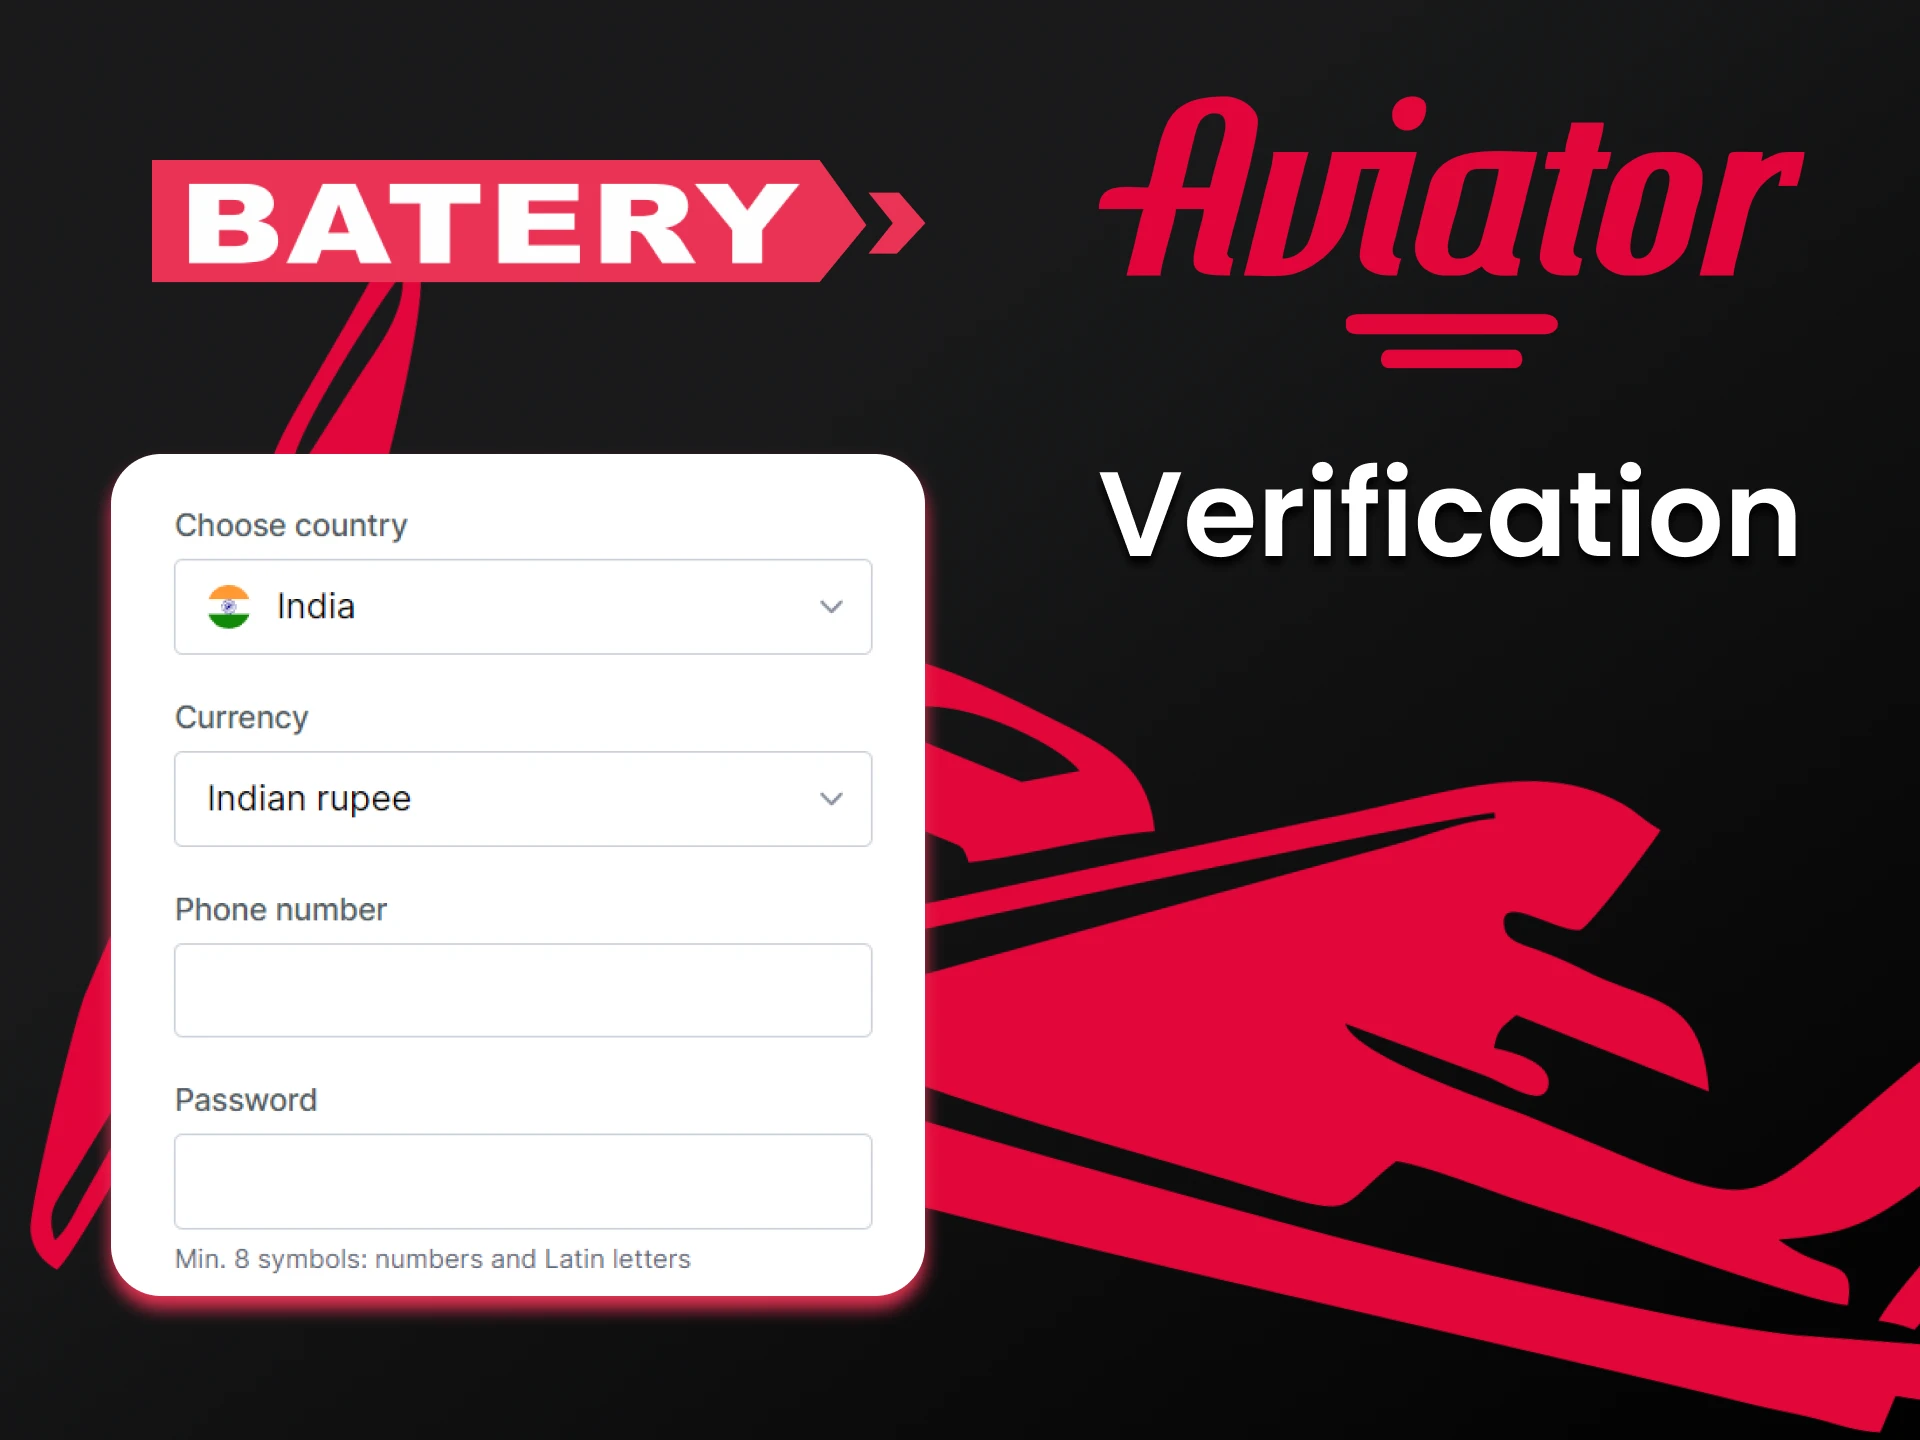 Use your personal details to play Aviator on Batery.